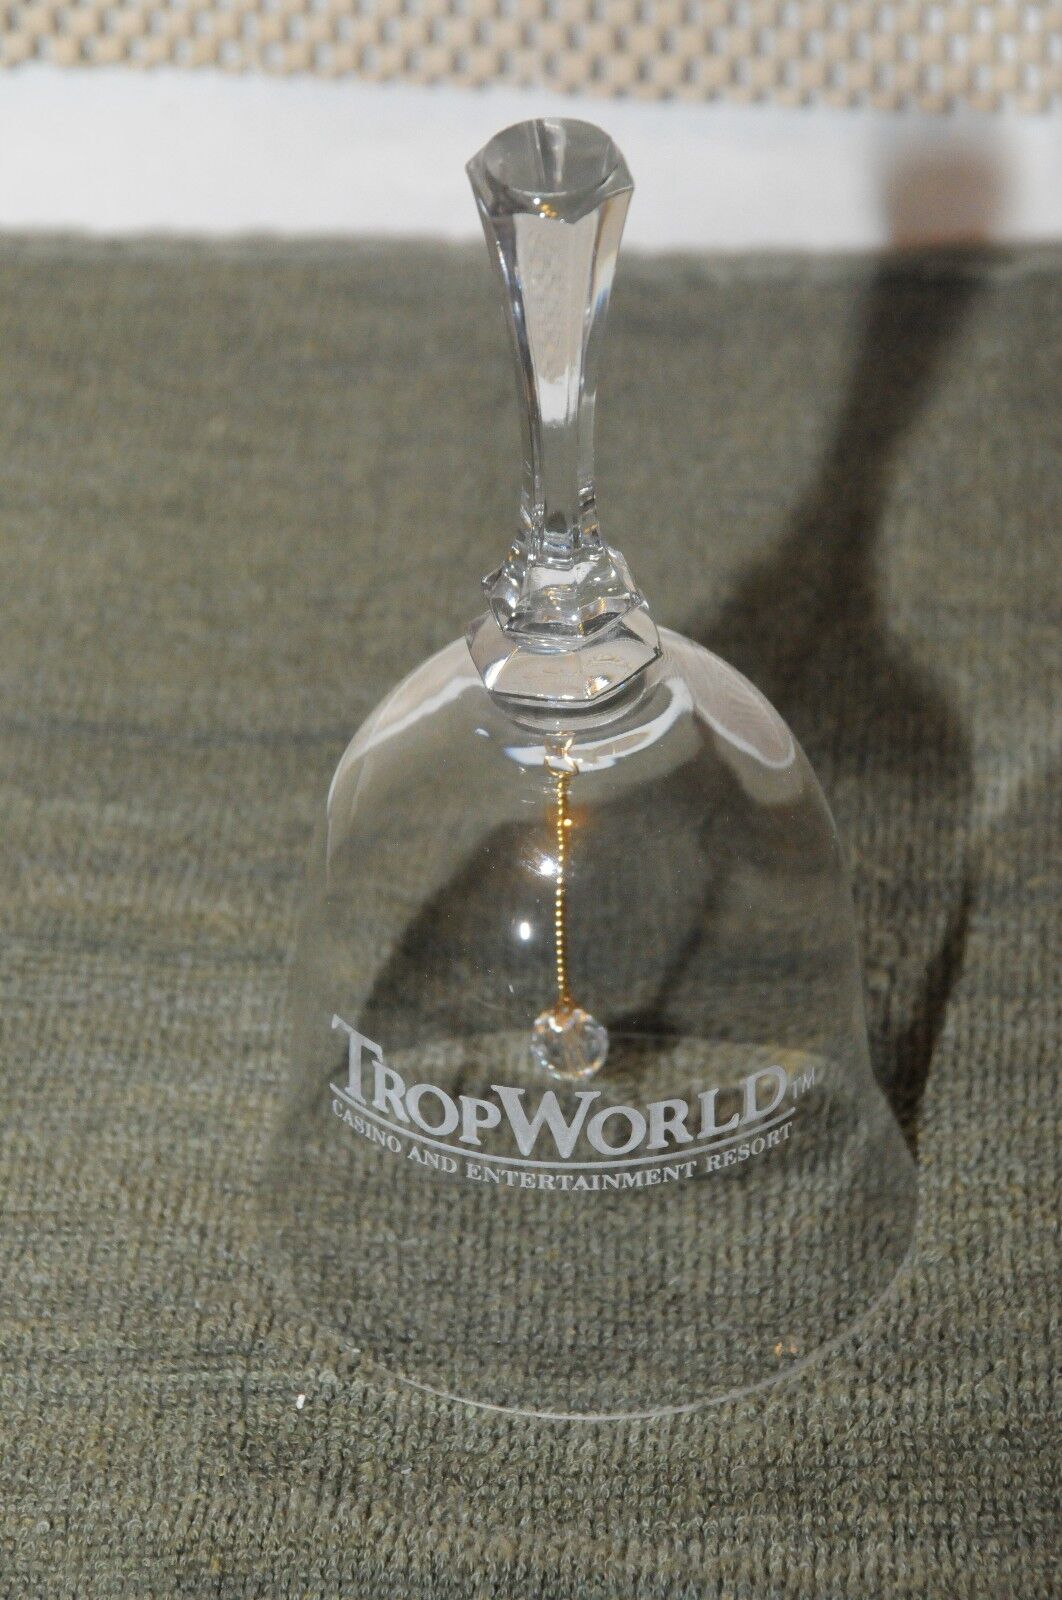  Trop World Casino & Resort  Etched Crystal Bell   Rare Exclusive  